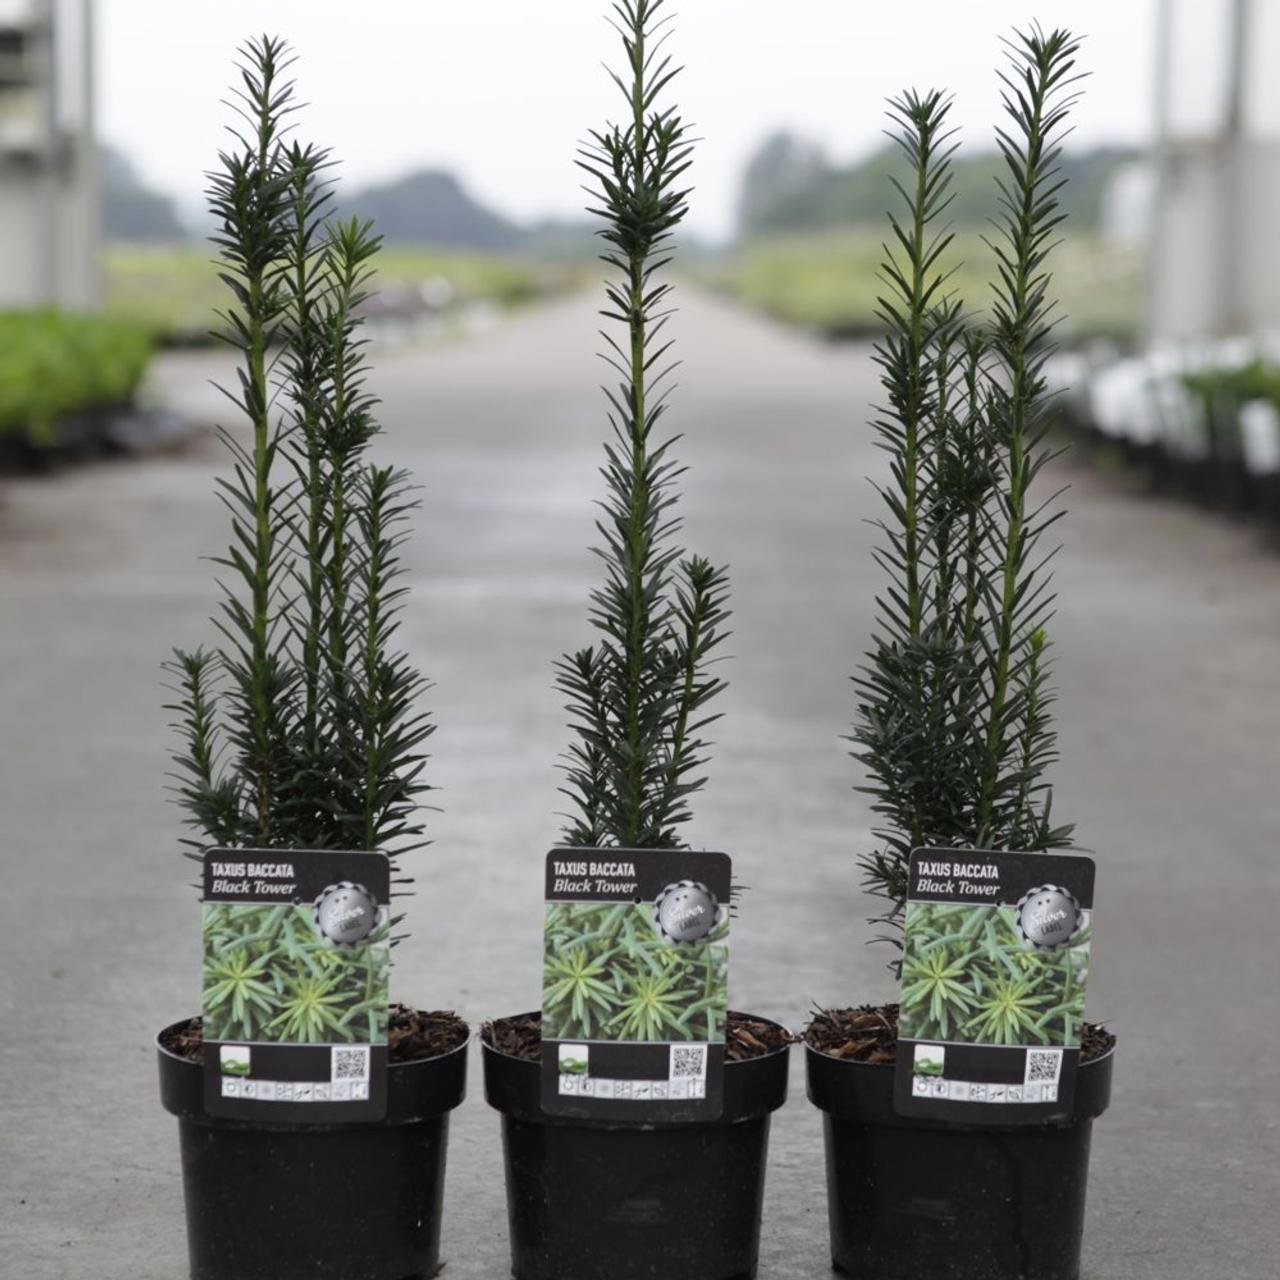 Taxus baccata 'Black Tower' plant